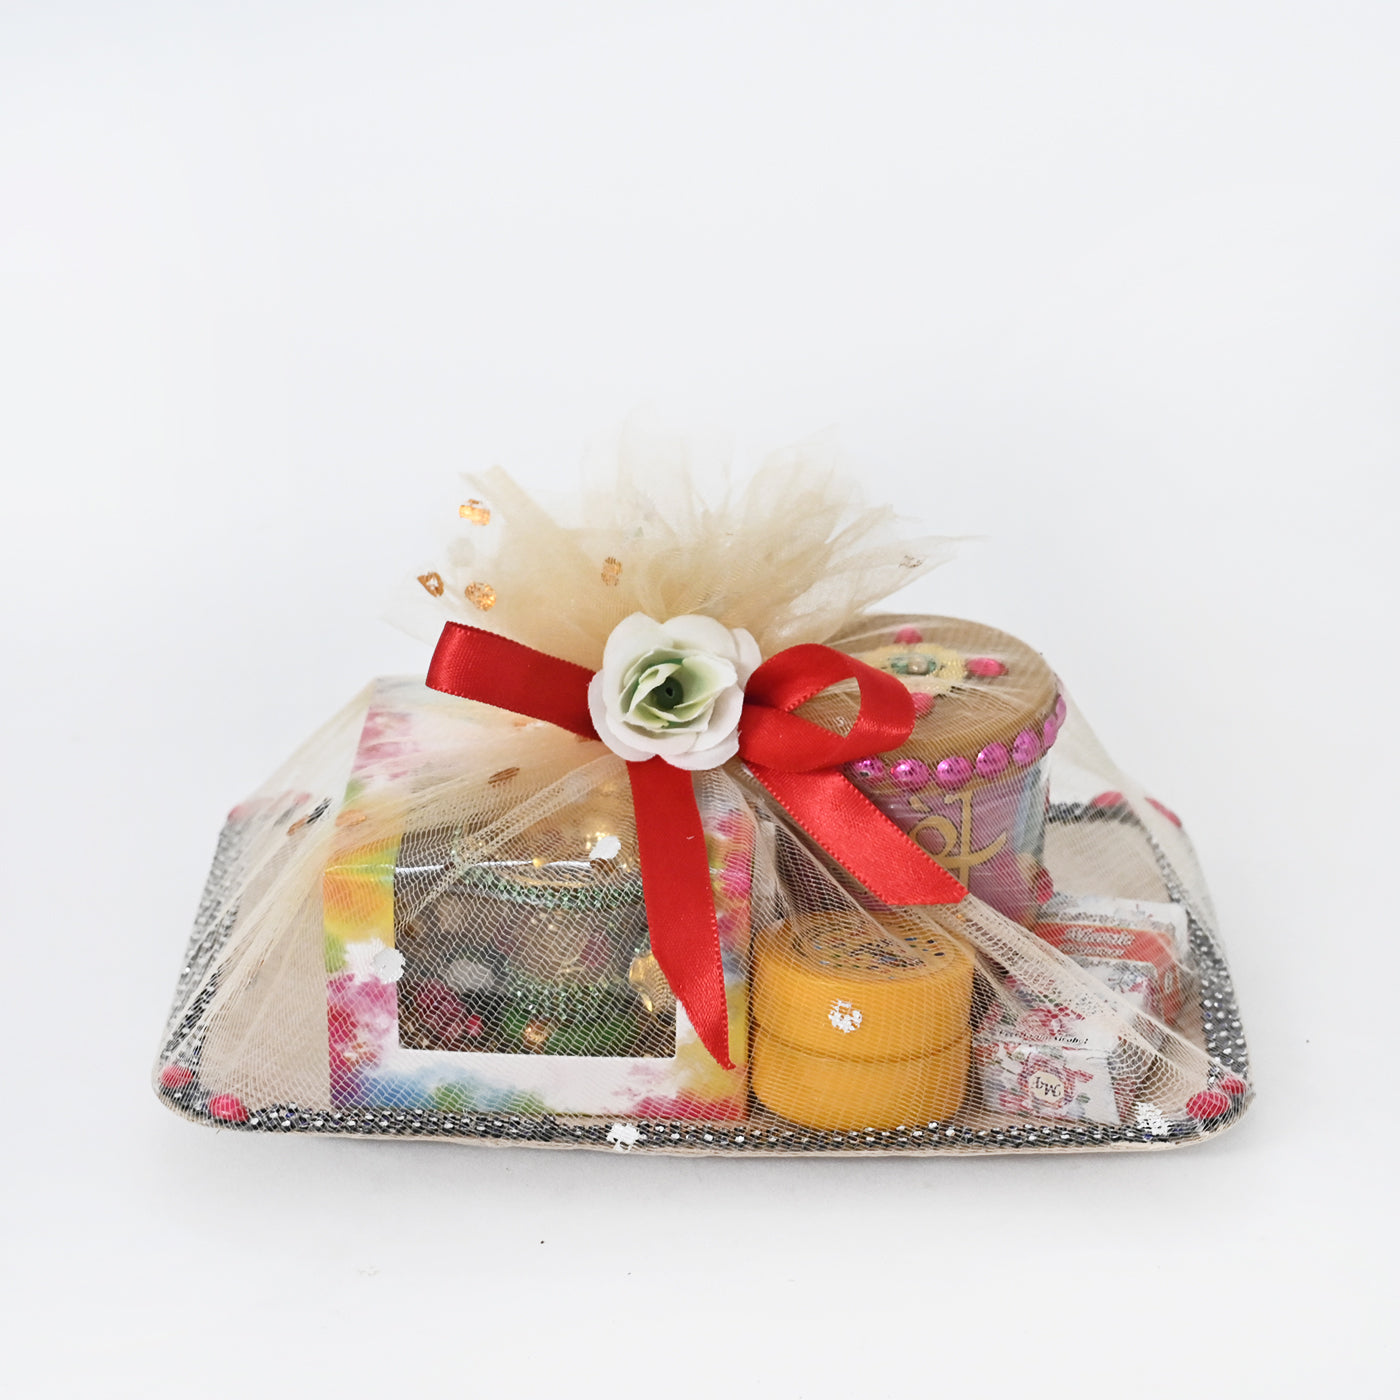 Make your Holi festivities extra special with these gift hampers